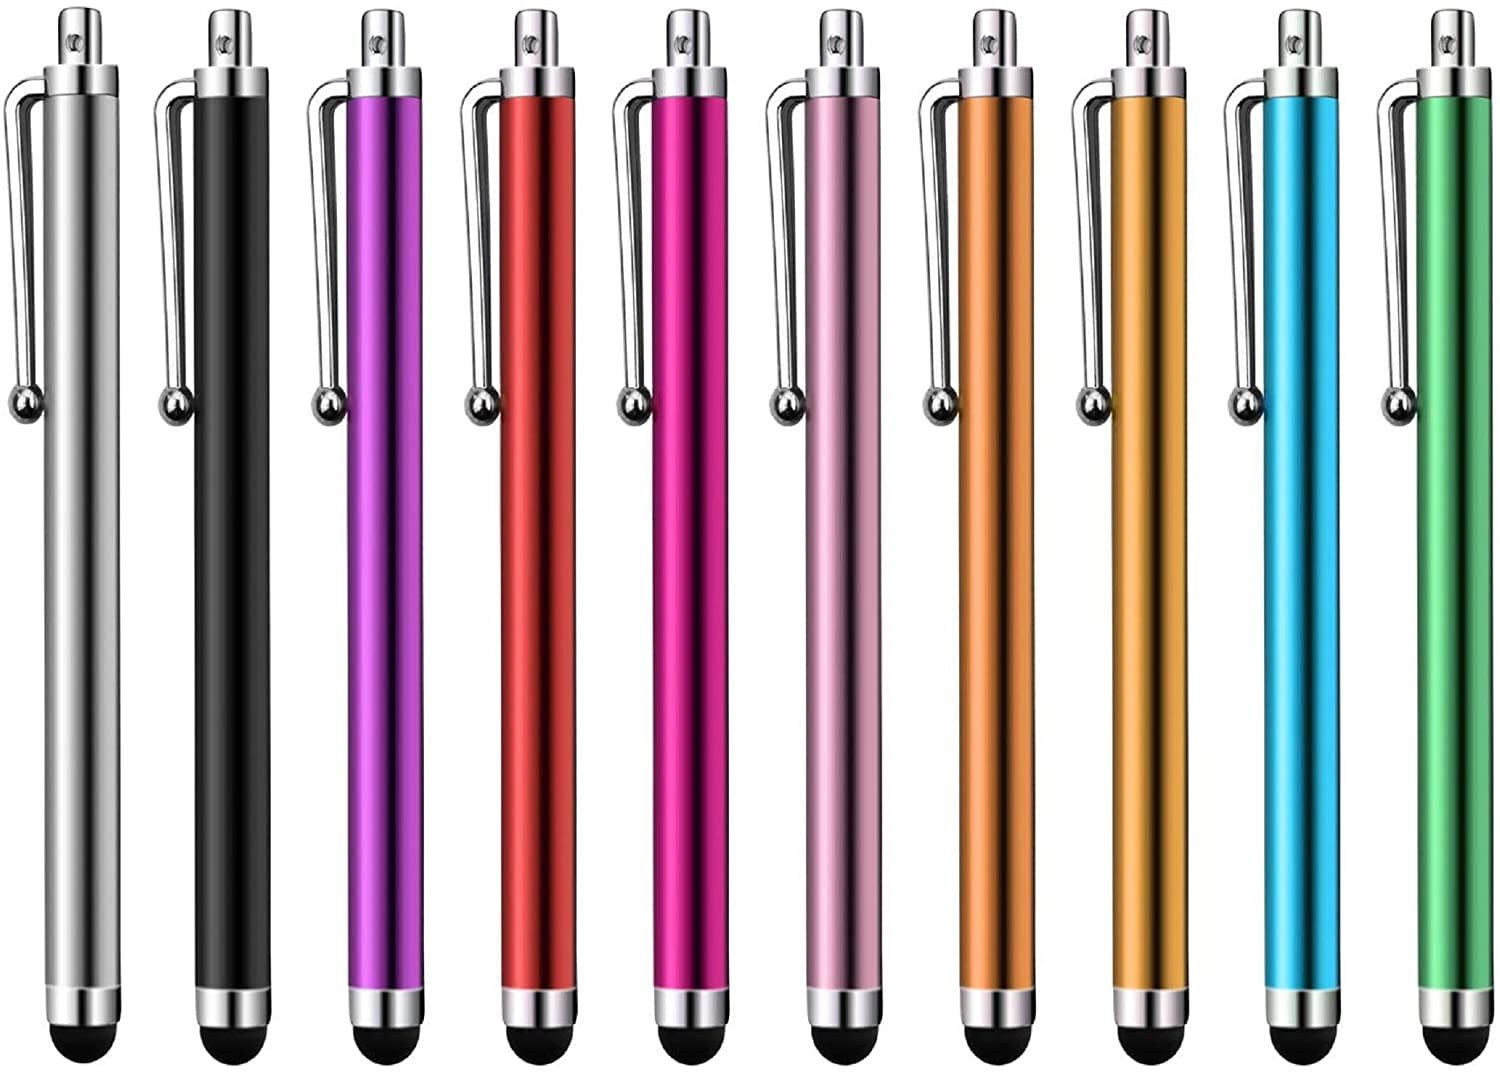 10x Universal Metal Touch Screen Pen Stylus For iPhone iPad Tablet Phone P HF 